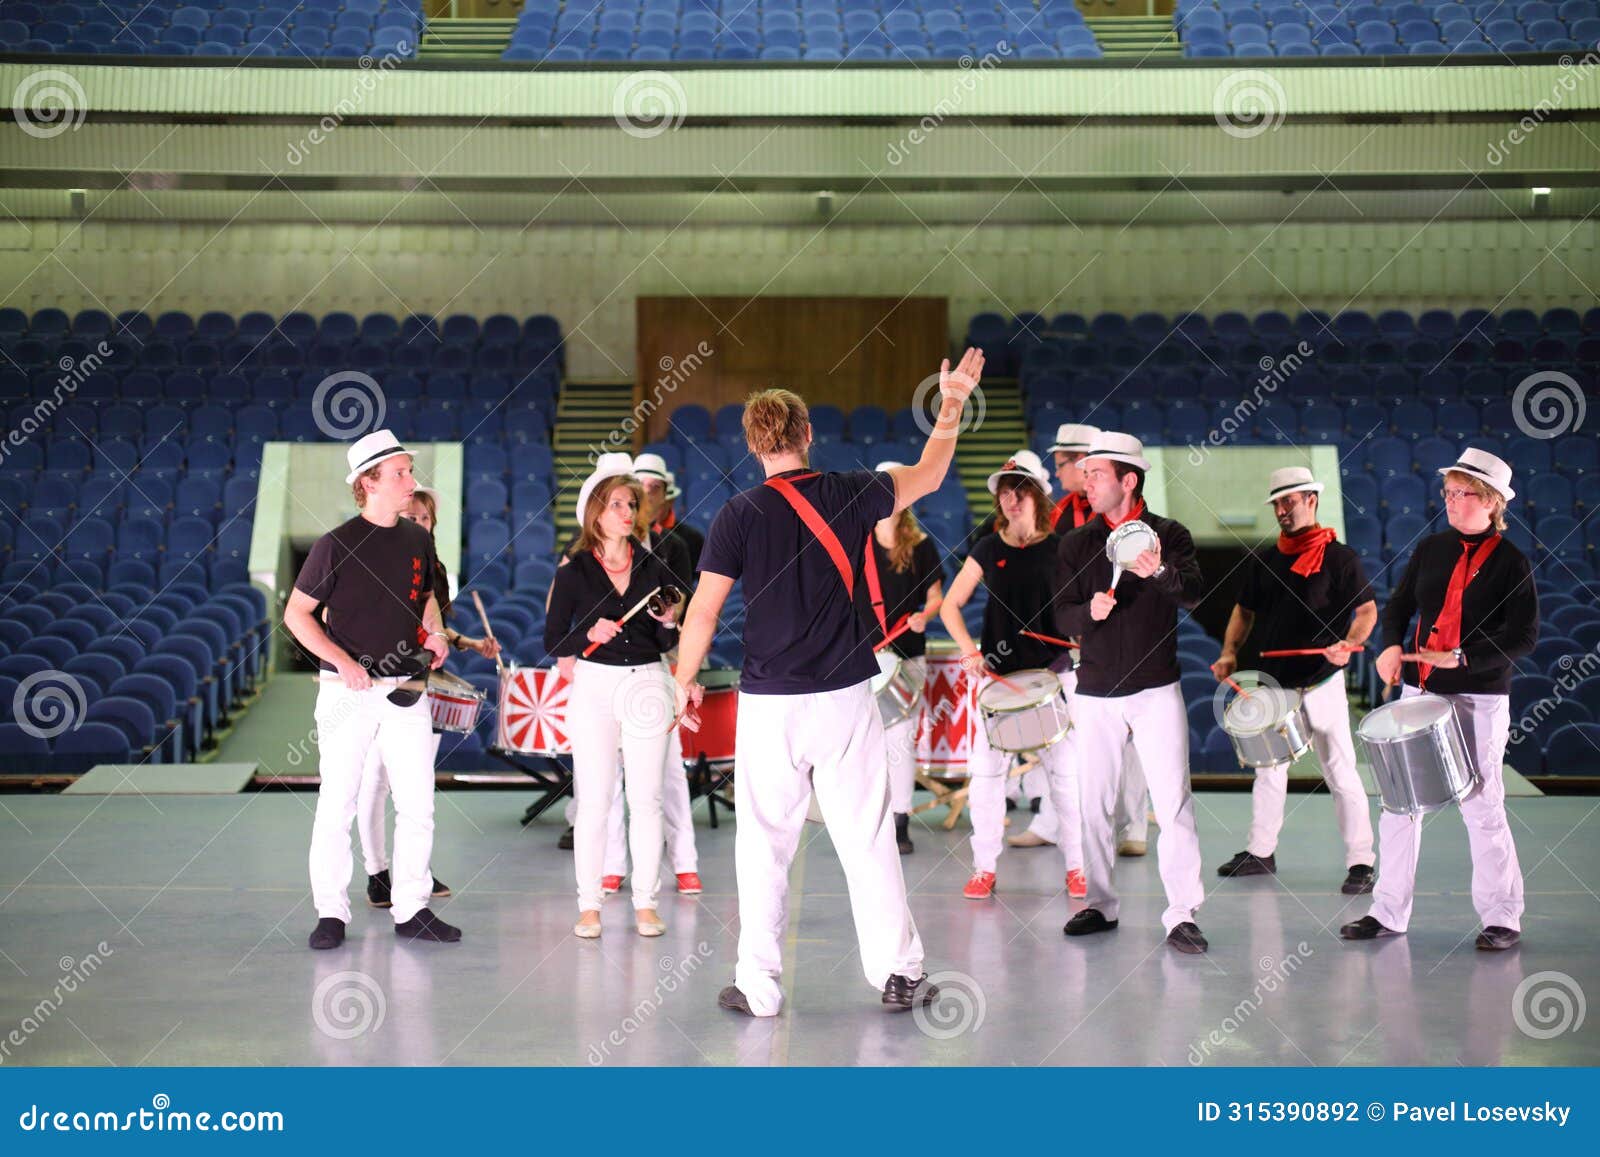 rehearsal of the drummers under the leadership of